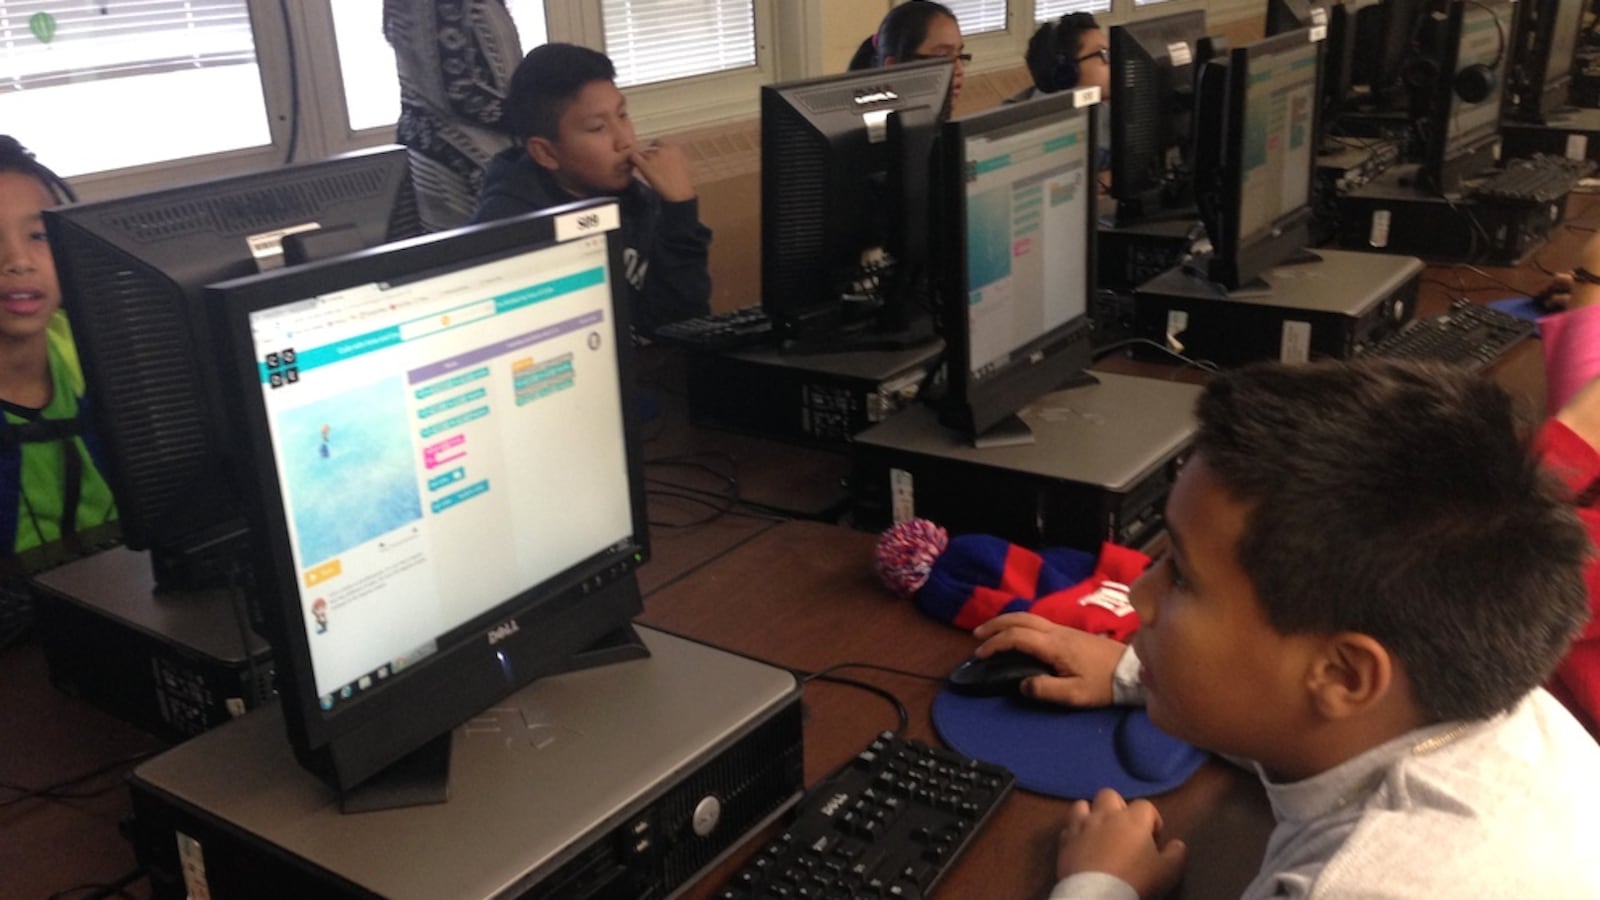 A sixth grade class at M.S. 88 participate in an "Hour of Coding" event organized by the computer science advocacy group Code.org. The city is planning to train 100 teachers on new computer science curriculum by 2017.